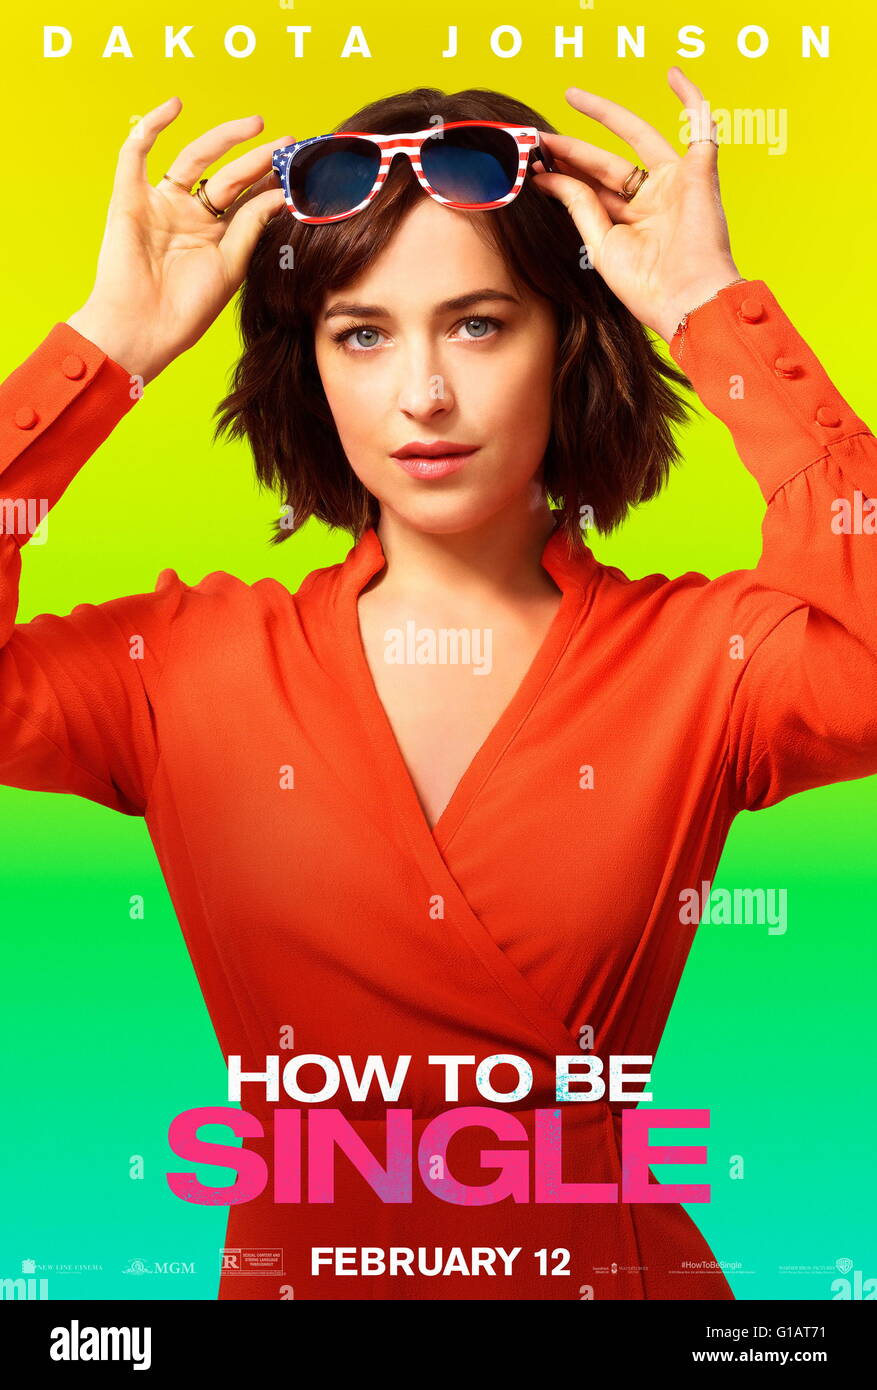 RELEASE DATE: February 12, 2016 TITLE: How To Be Single STUDIO: New Line Cinema DIRECTOR: Christian Ditter PLOT: There's a right way to be single, a wrong way to be single, and then...there's Alice. And Robin. Lucy. Meg. Tom. David. New York City is full of lonely hearts seeking the right match, be it a love connection, a hook-up, or something in the middle. Sleeping around in the city that never sleeps was never so much fun. PICTURED: Starring - Dakota Johnson, Rebel Wilson, Leslie Mann, Alison Brie (Credit: c New Line Cinema/Entertainment Pictures/) Stock Photo